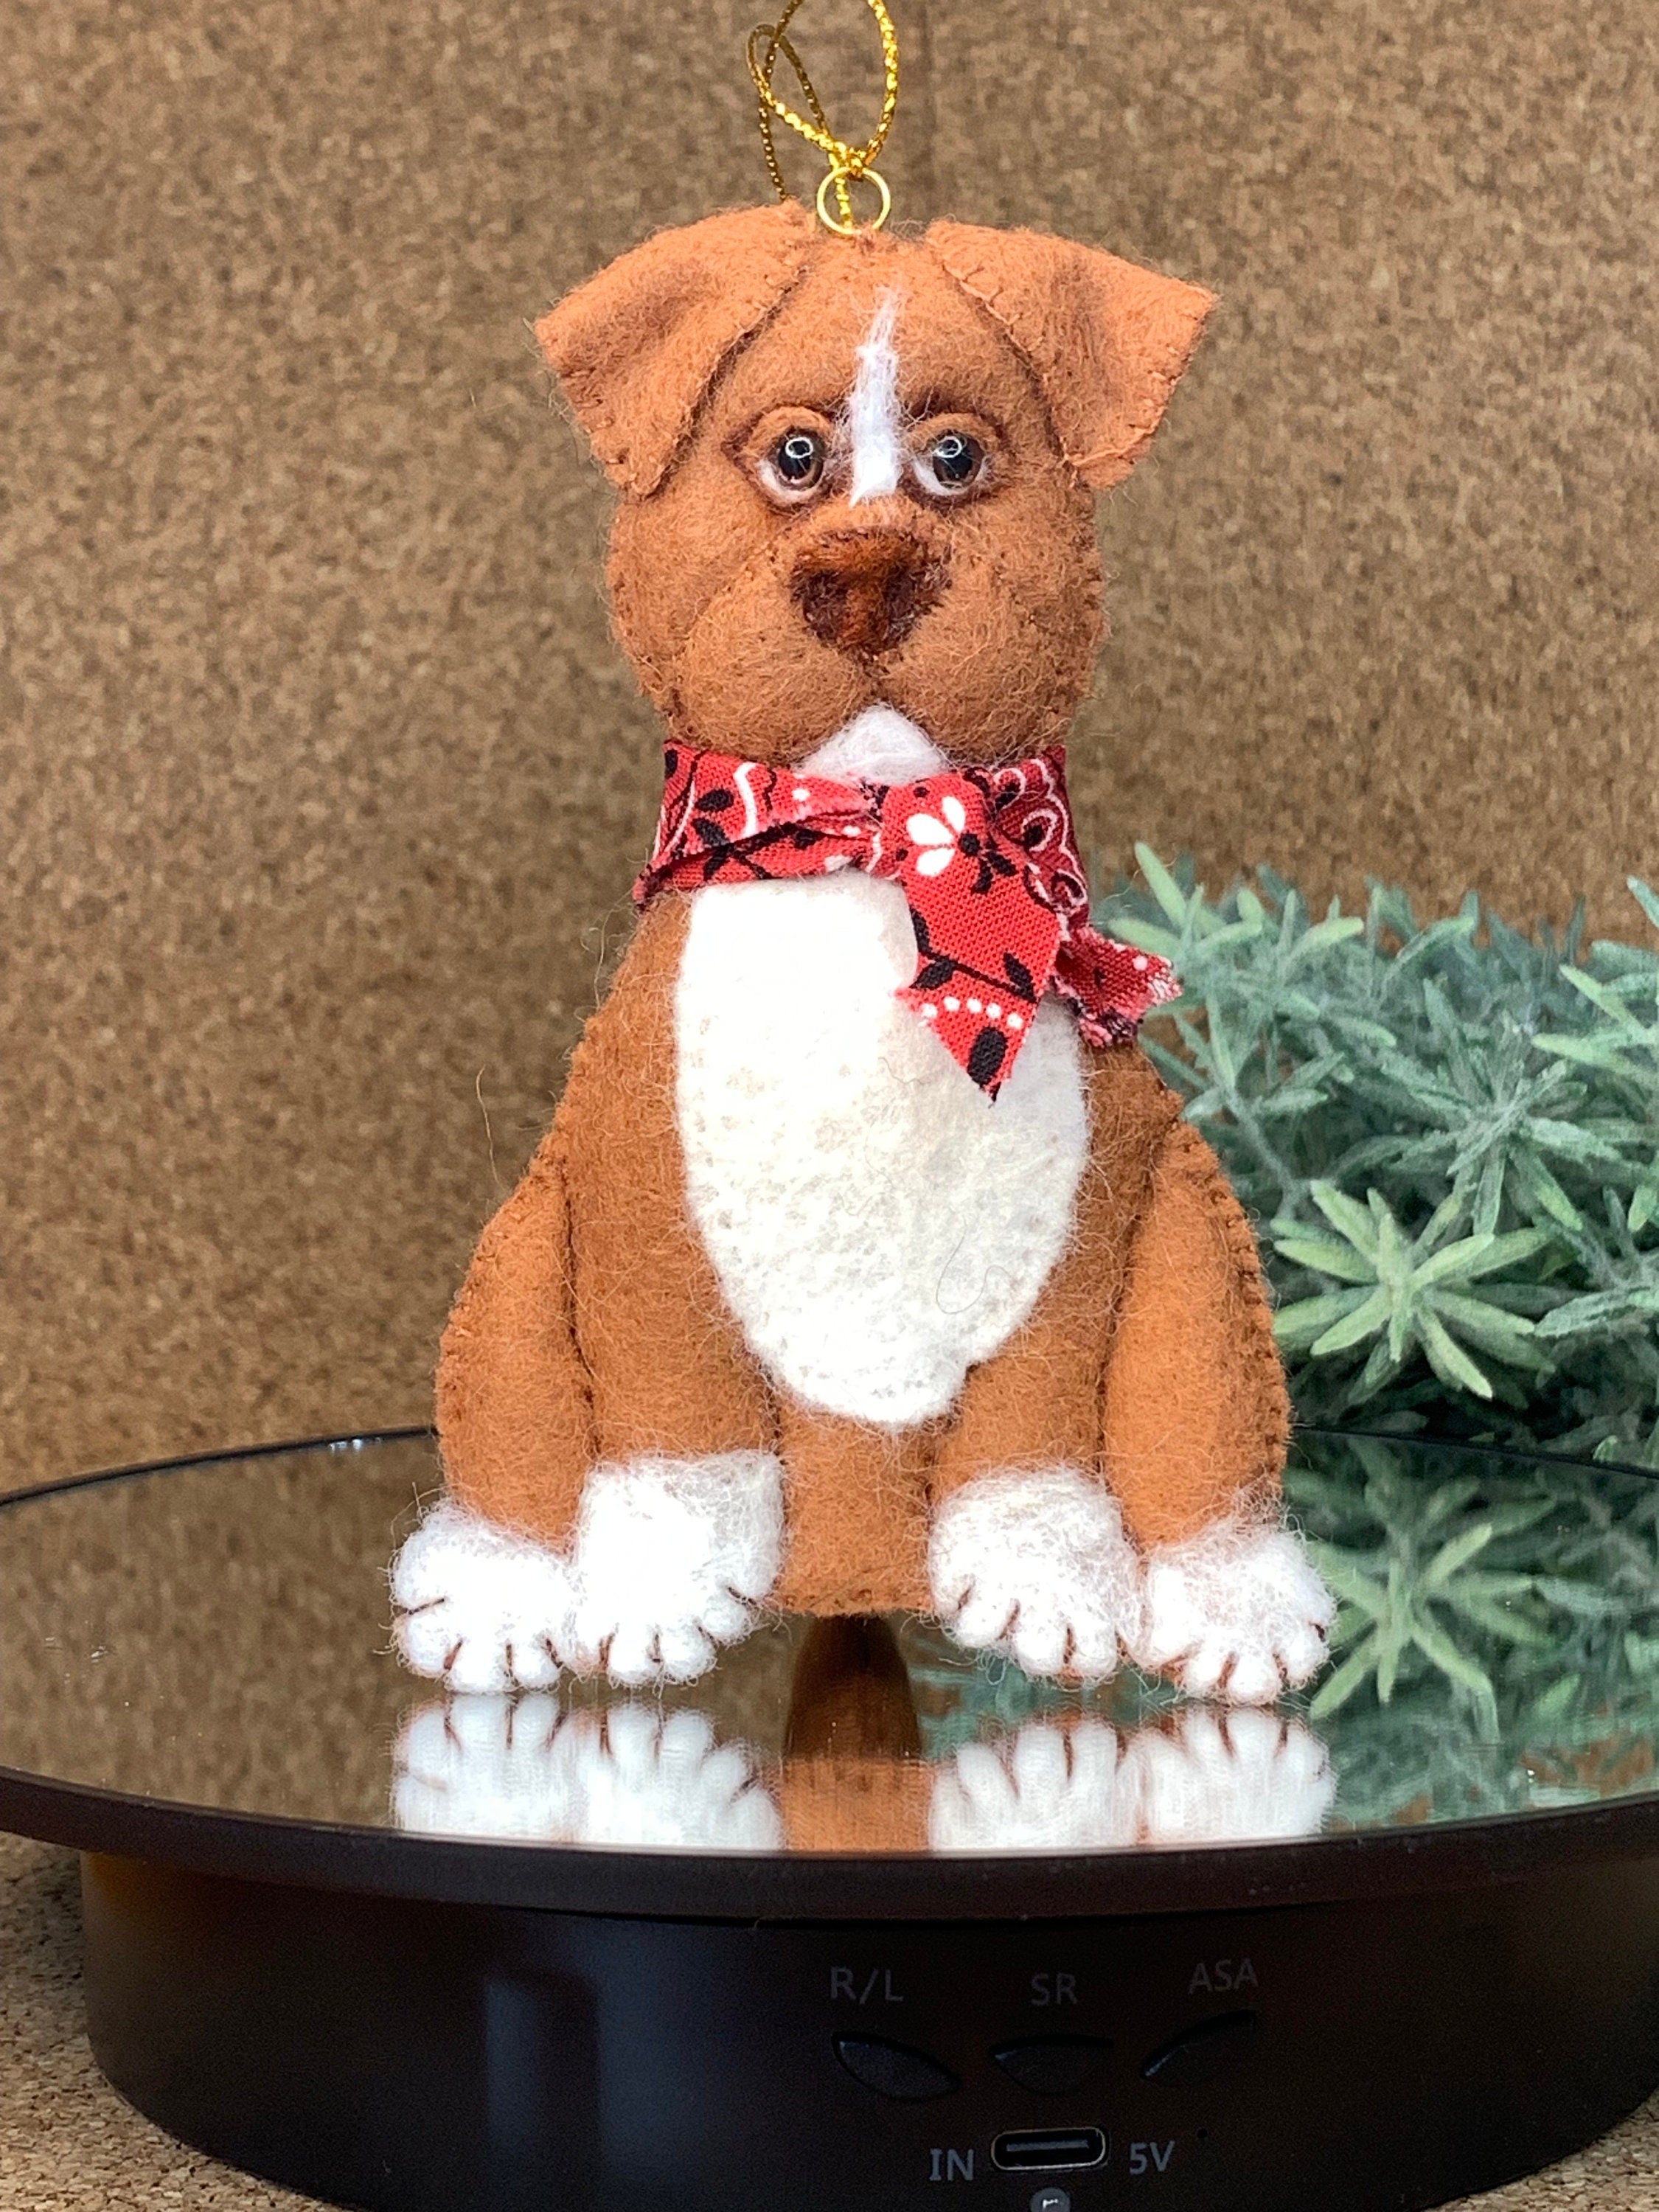 Red Nosed Pitbull Felt Ornament with white patches and white paws with floppy ears